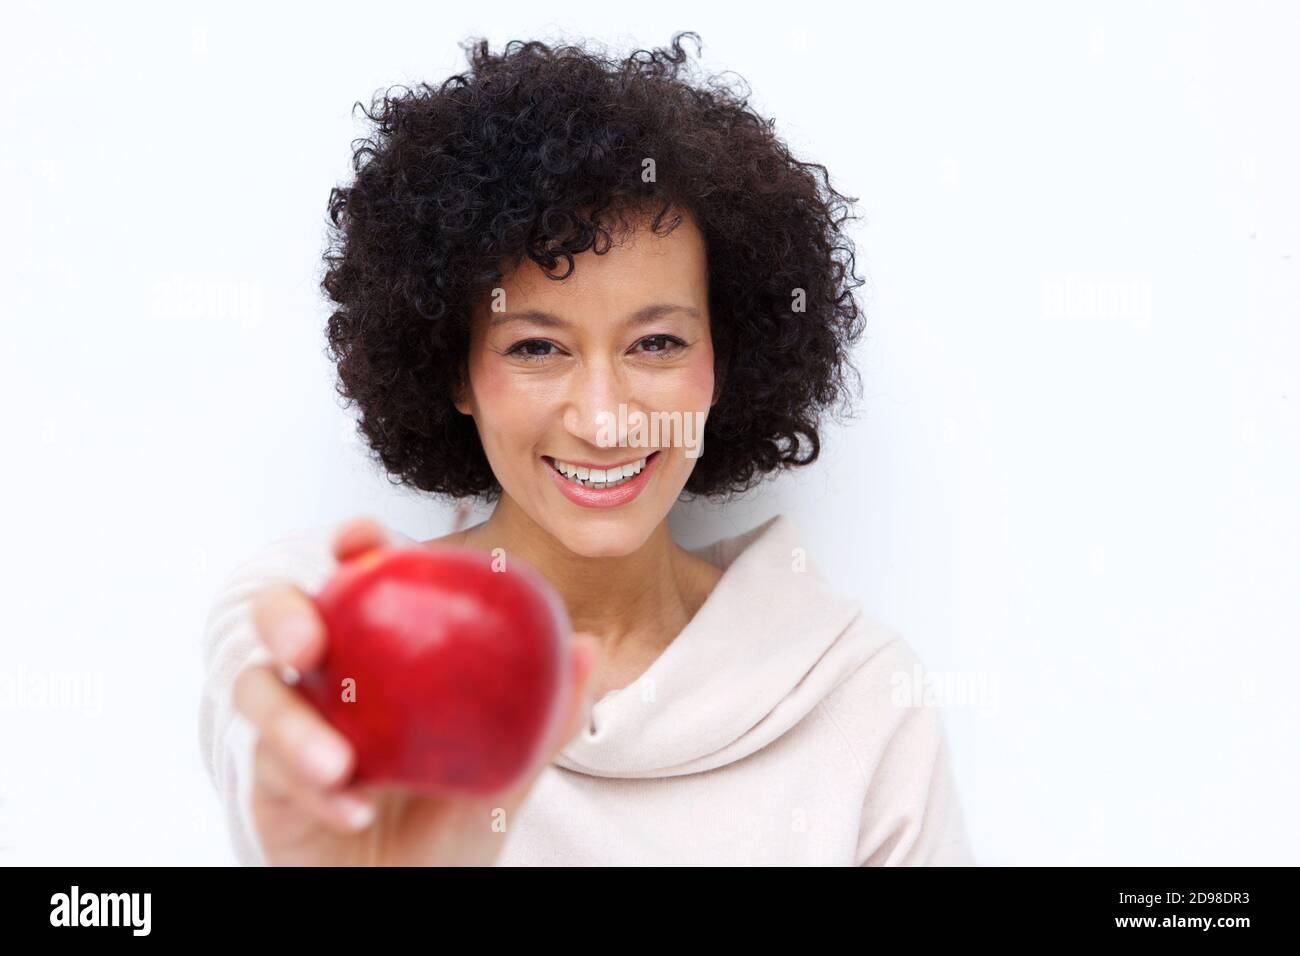 Close up portrait of smiling older woman holding red apple Stock Photo